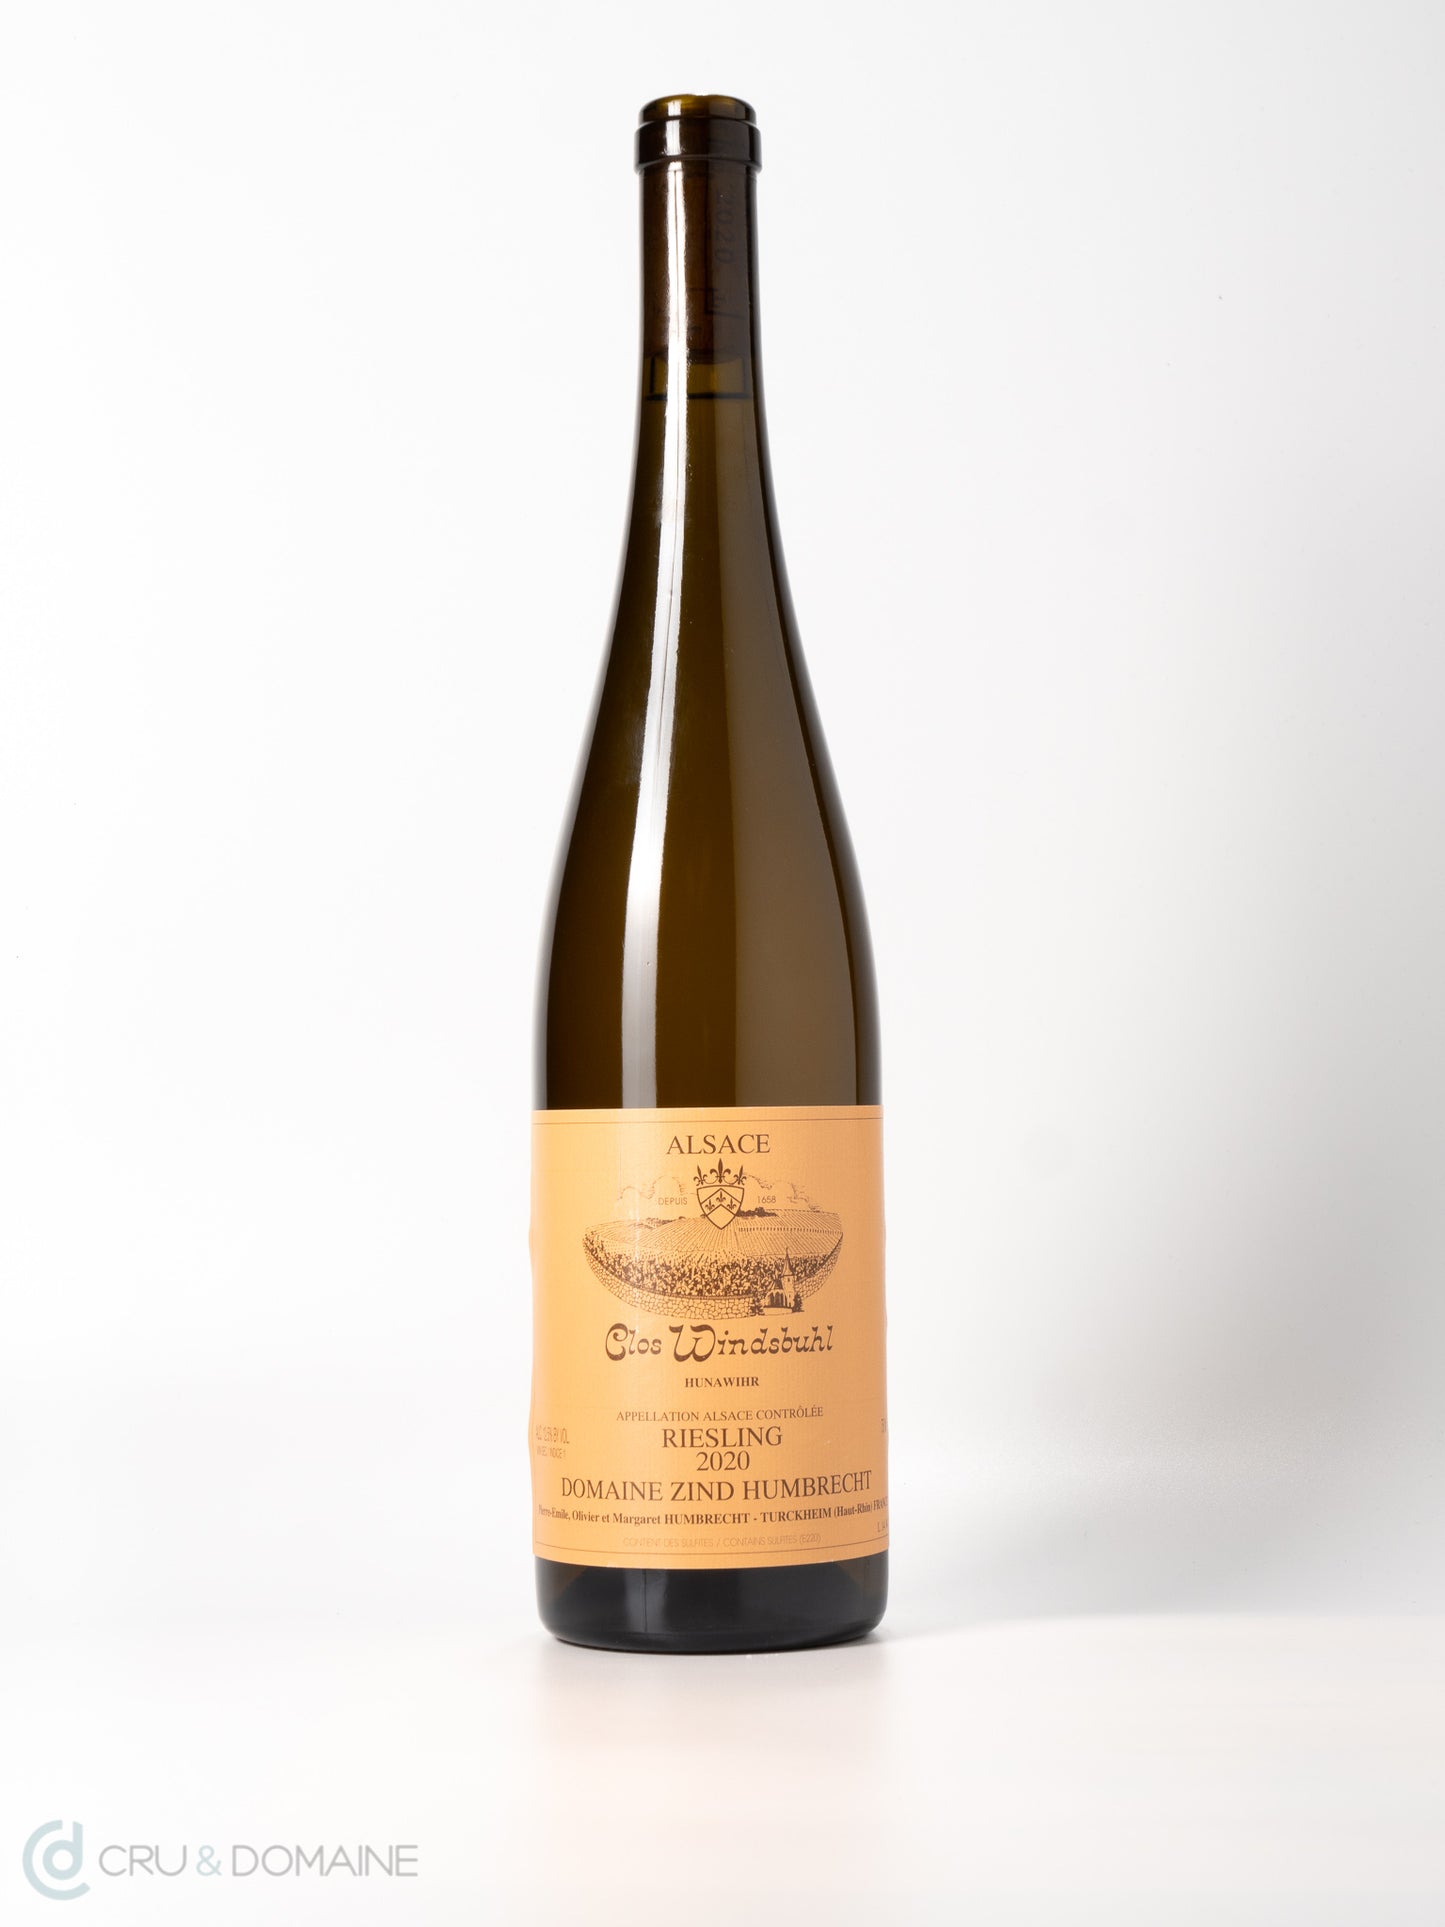 2020 Domaine Zind-Humbrecht, Clos Windsbuhl, Riesling, Alsace